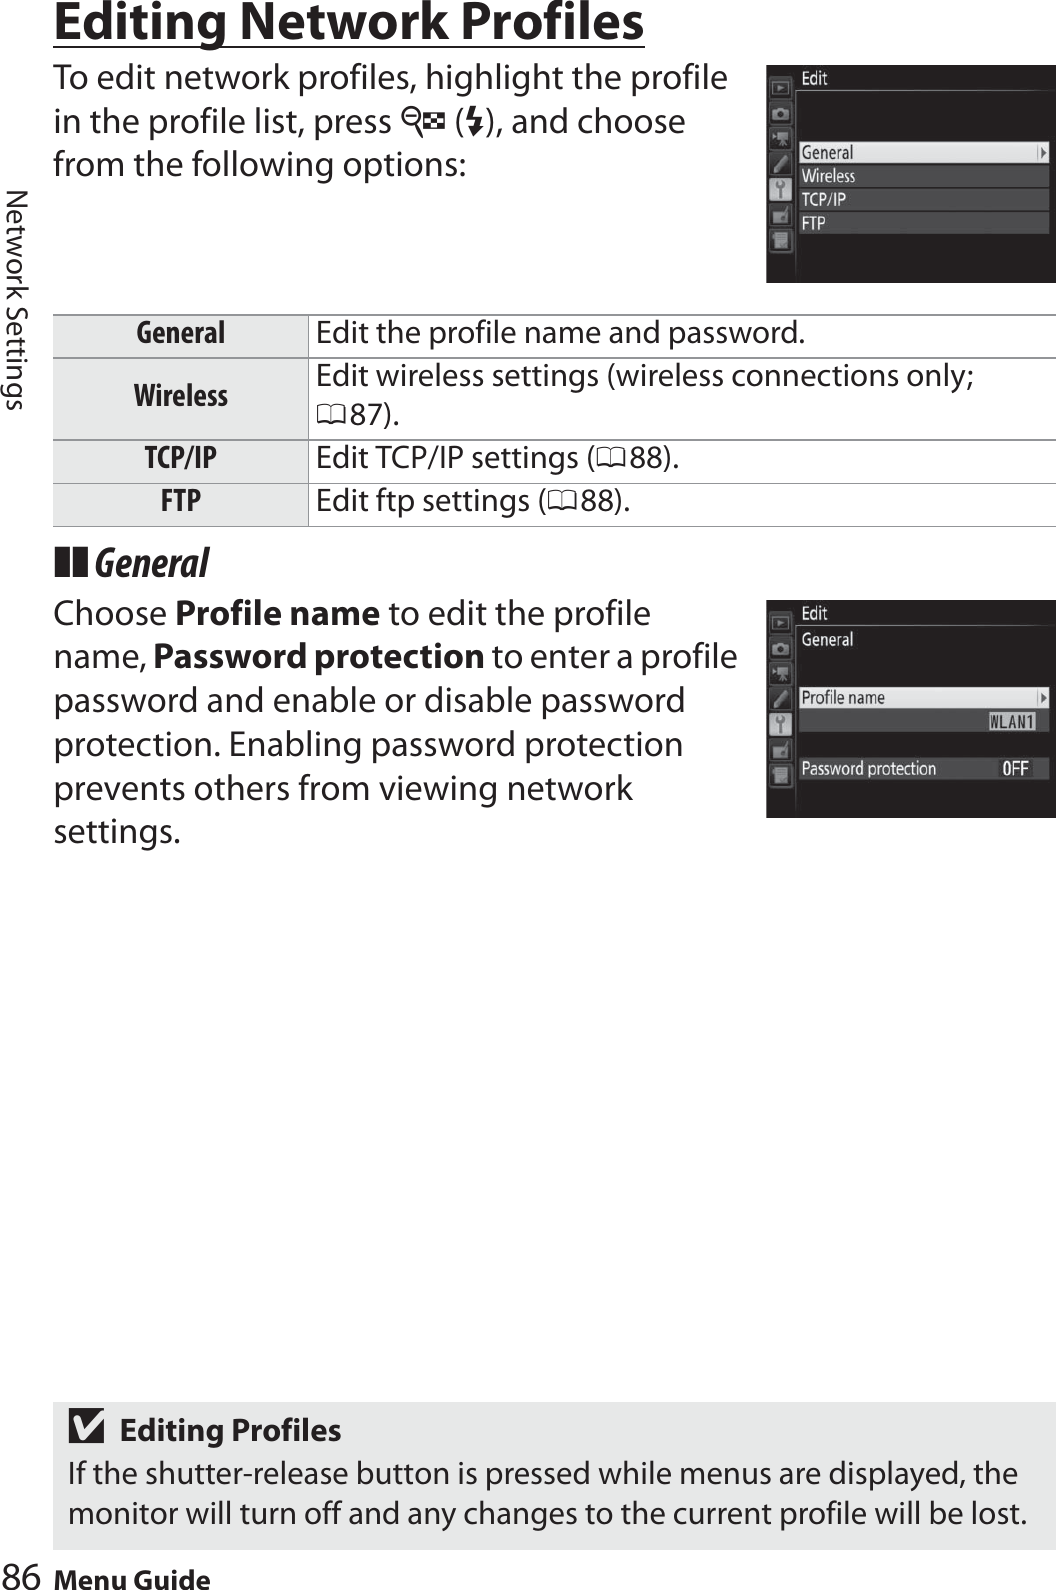 86 Menu GuideNetwork SettingsEditing Network ProfilesTo edit network profiles, highlight the profile in the profile list, press W (M), and choose from the following options:❚❚ GeneralChoose Profile name to edit the profile name, Password protection to enter a profile password and enable or disable password protection. Enabling password protection prevents others from viewing network settings.General Edit the profile name and password.Wireless Edit wireless settings (wireless connections only; 087).TCP/IP Edit TCP/IP settings (088).FTP Edit ftp settings (088).DEditing ProfilesIf the shutter-release button is pressed while menus are displayed, the monitor will turn off and any changes to the current profile will be lost.